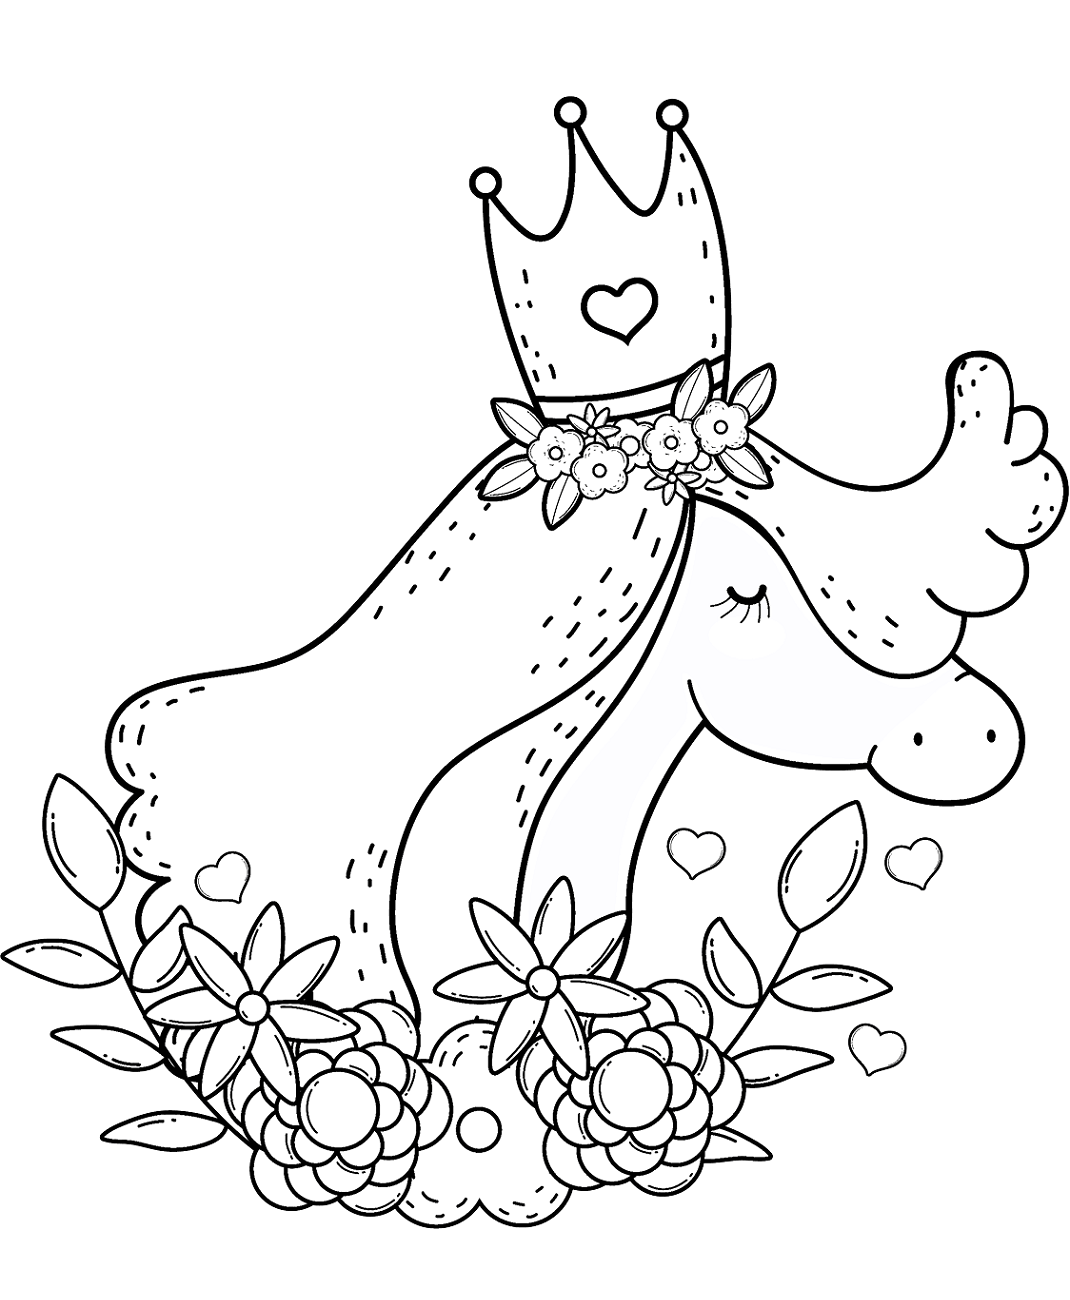 Unicorn Wearing Crown Coloring Pages - Coloring Cool